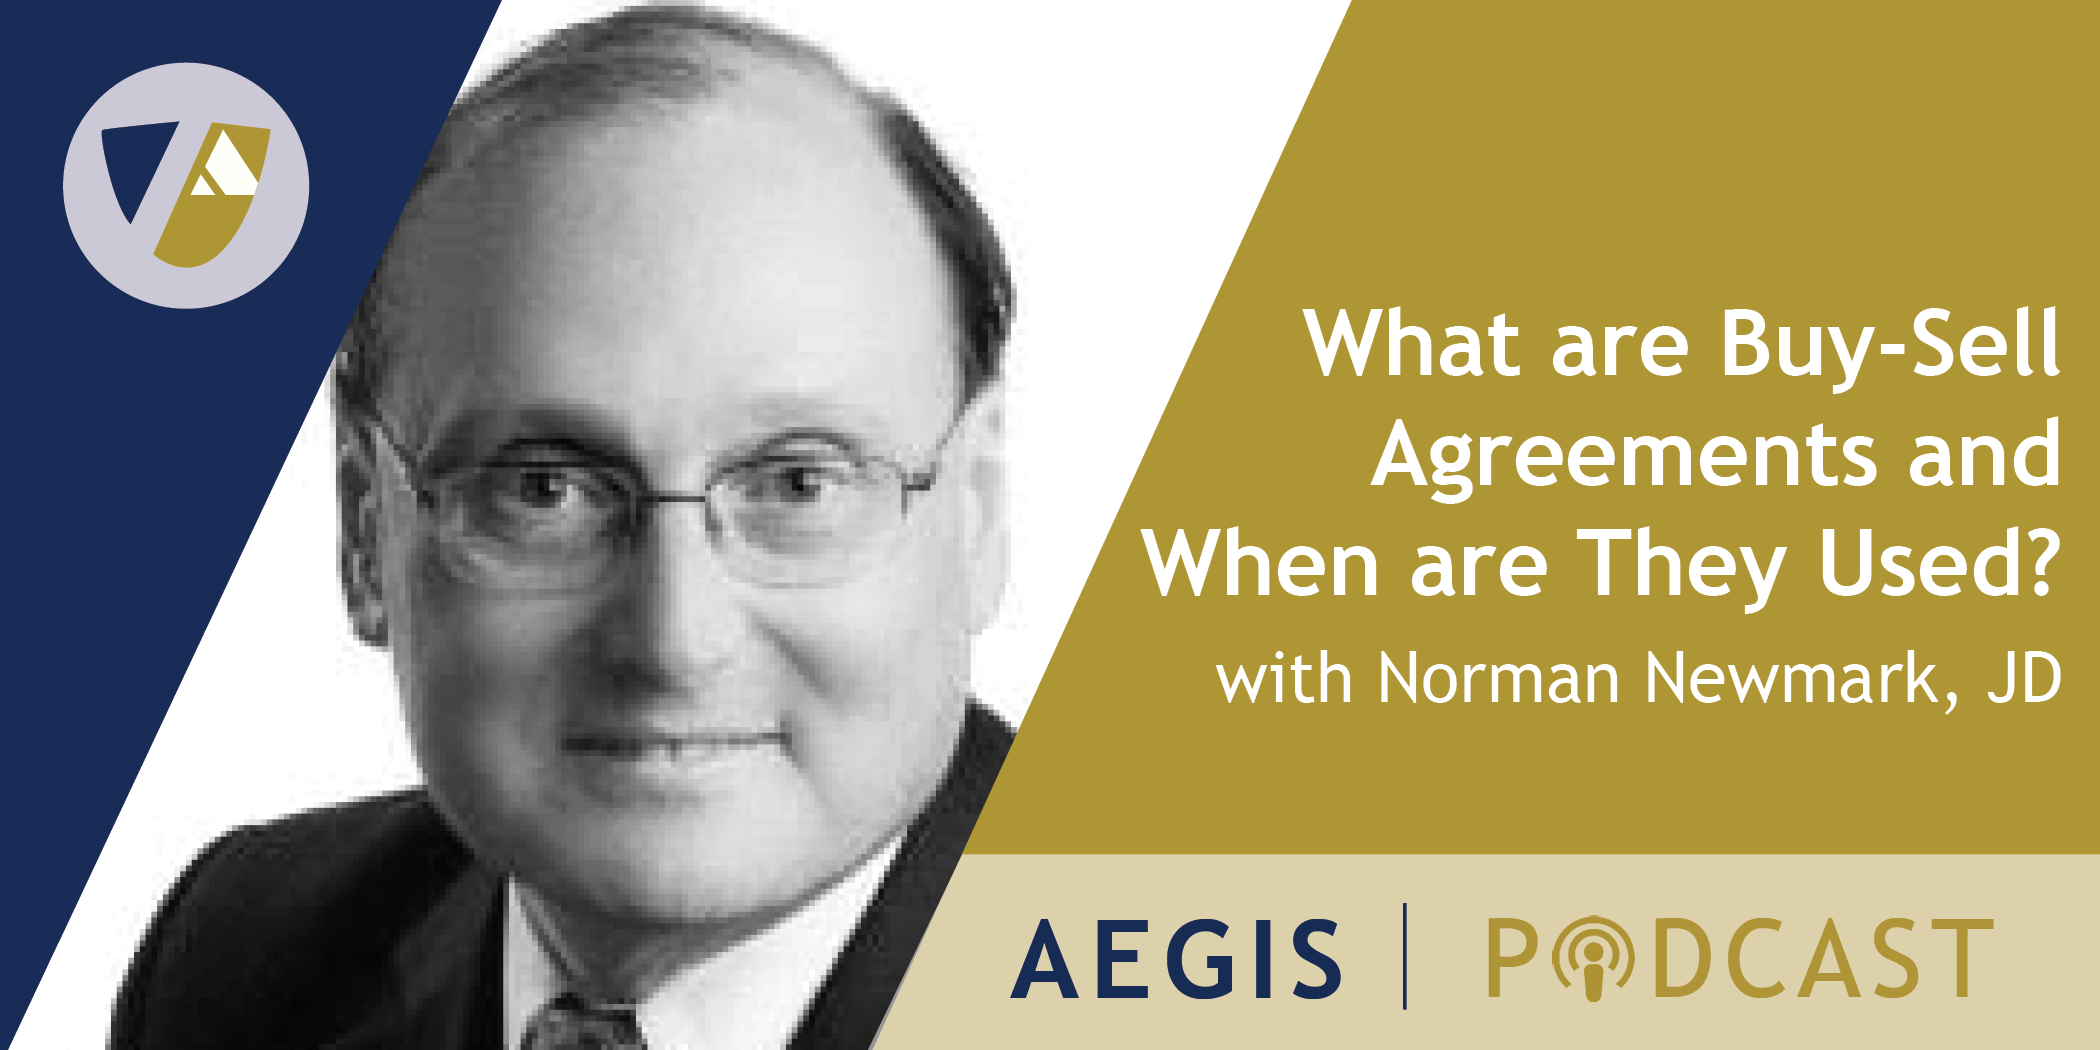 The AEGIS Podcast: Interview with Norman Newmark, JD – What are Buy-Sell Agreements and When Are They Used?